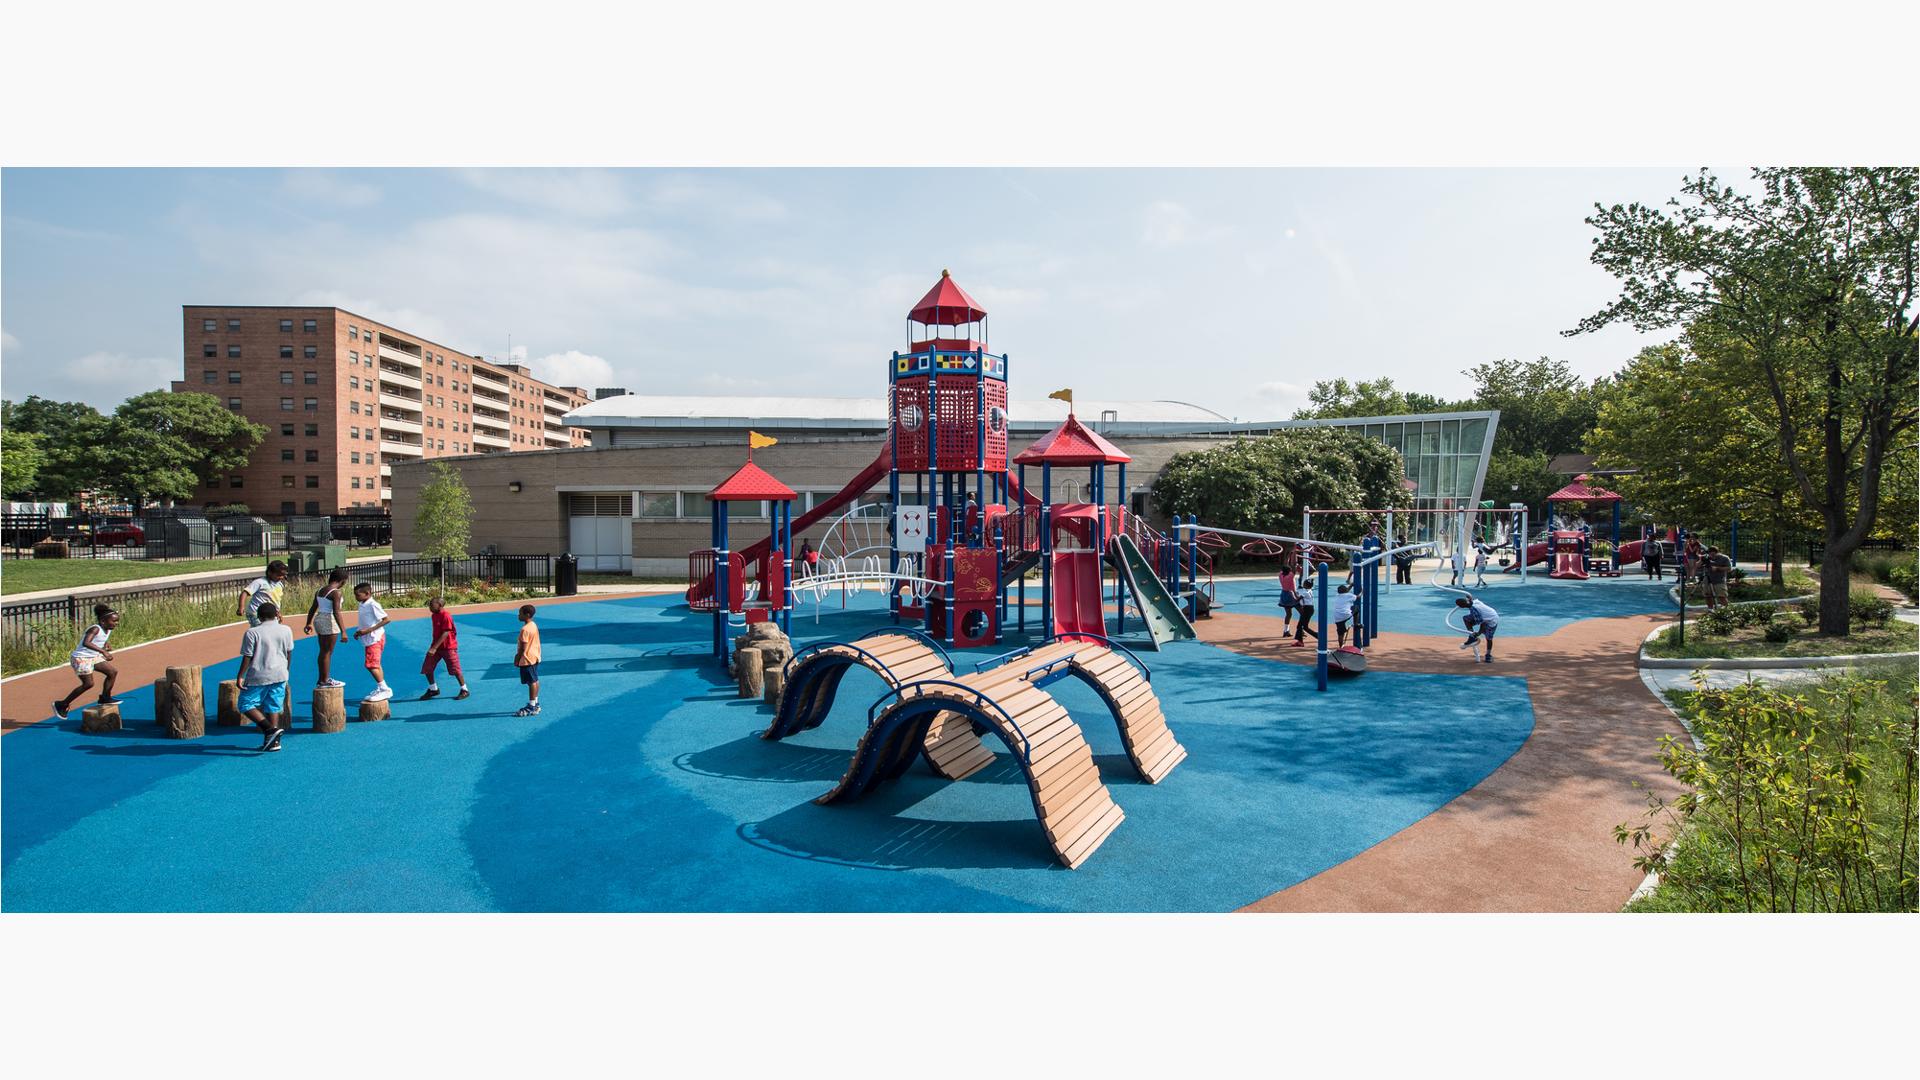 King Greenleaf Playground in Washington, DC features a lighthouse-themed PlayBooster® play structure and wave-themed climbers for all ages.